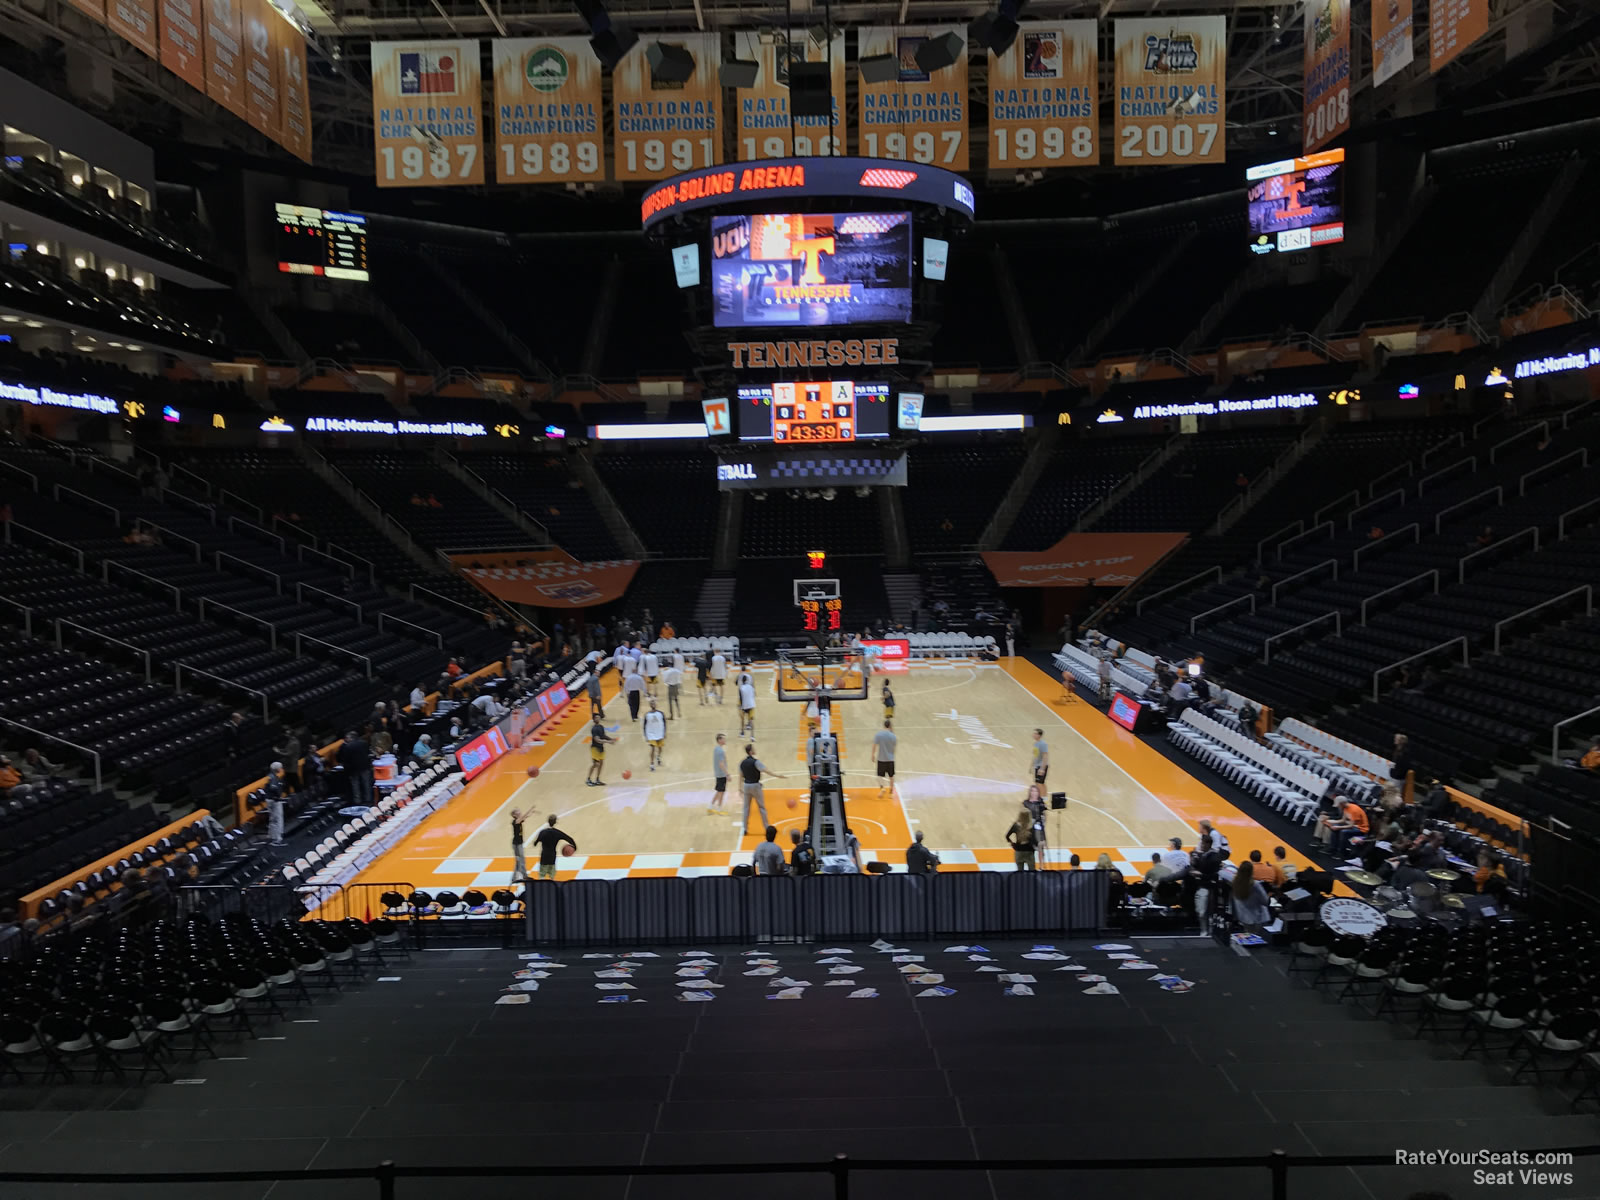 section 129, row 17 seat view  - thompson-boling arena